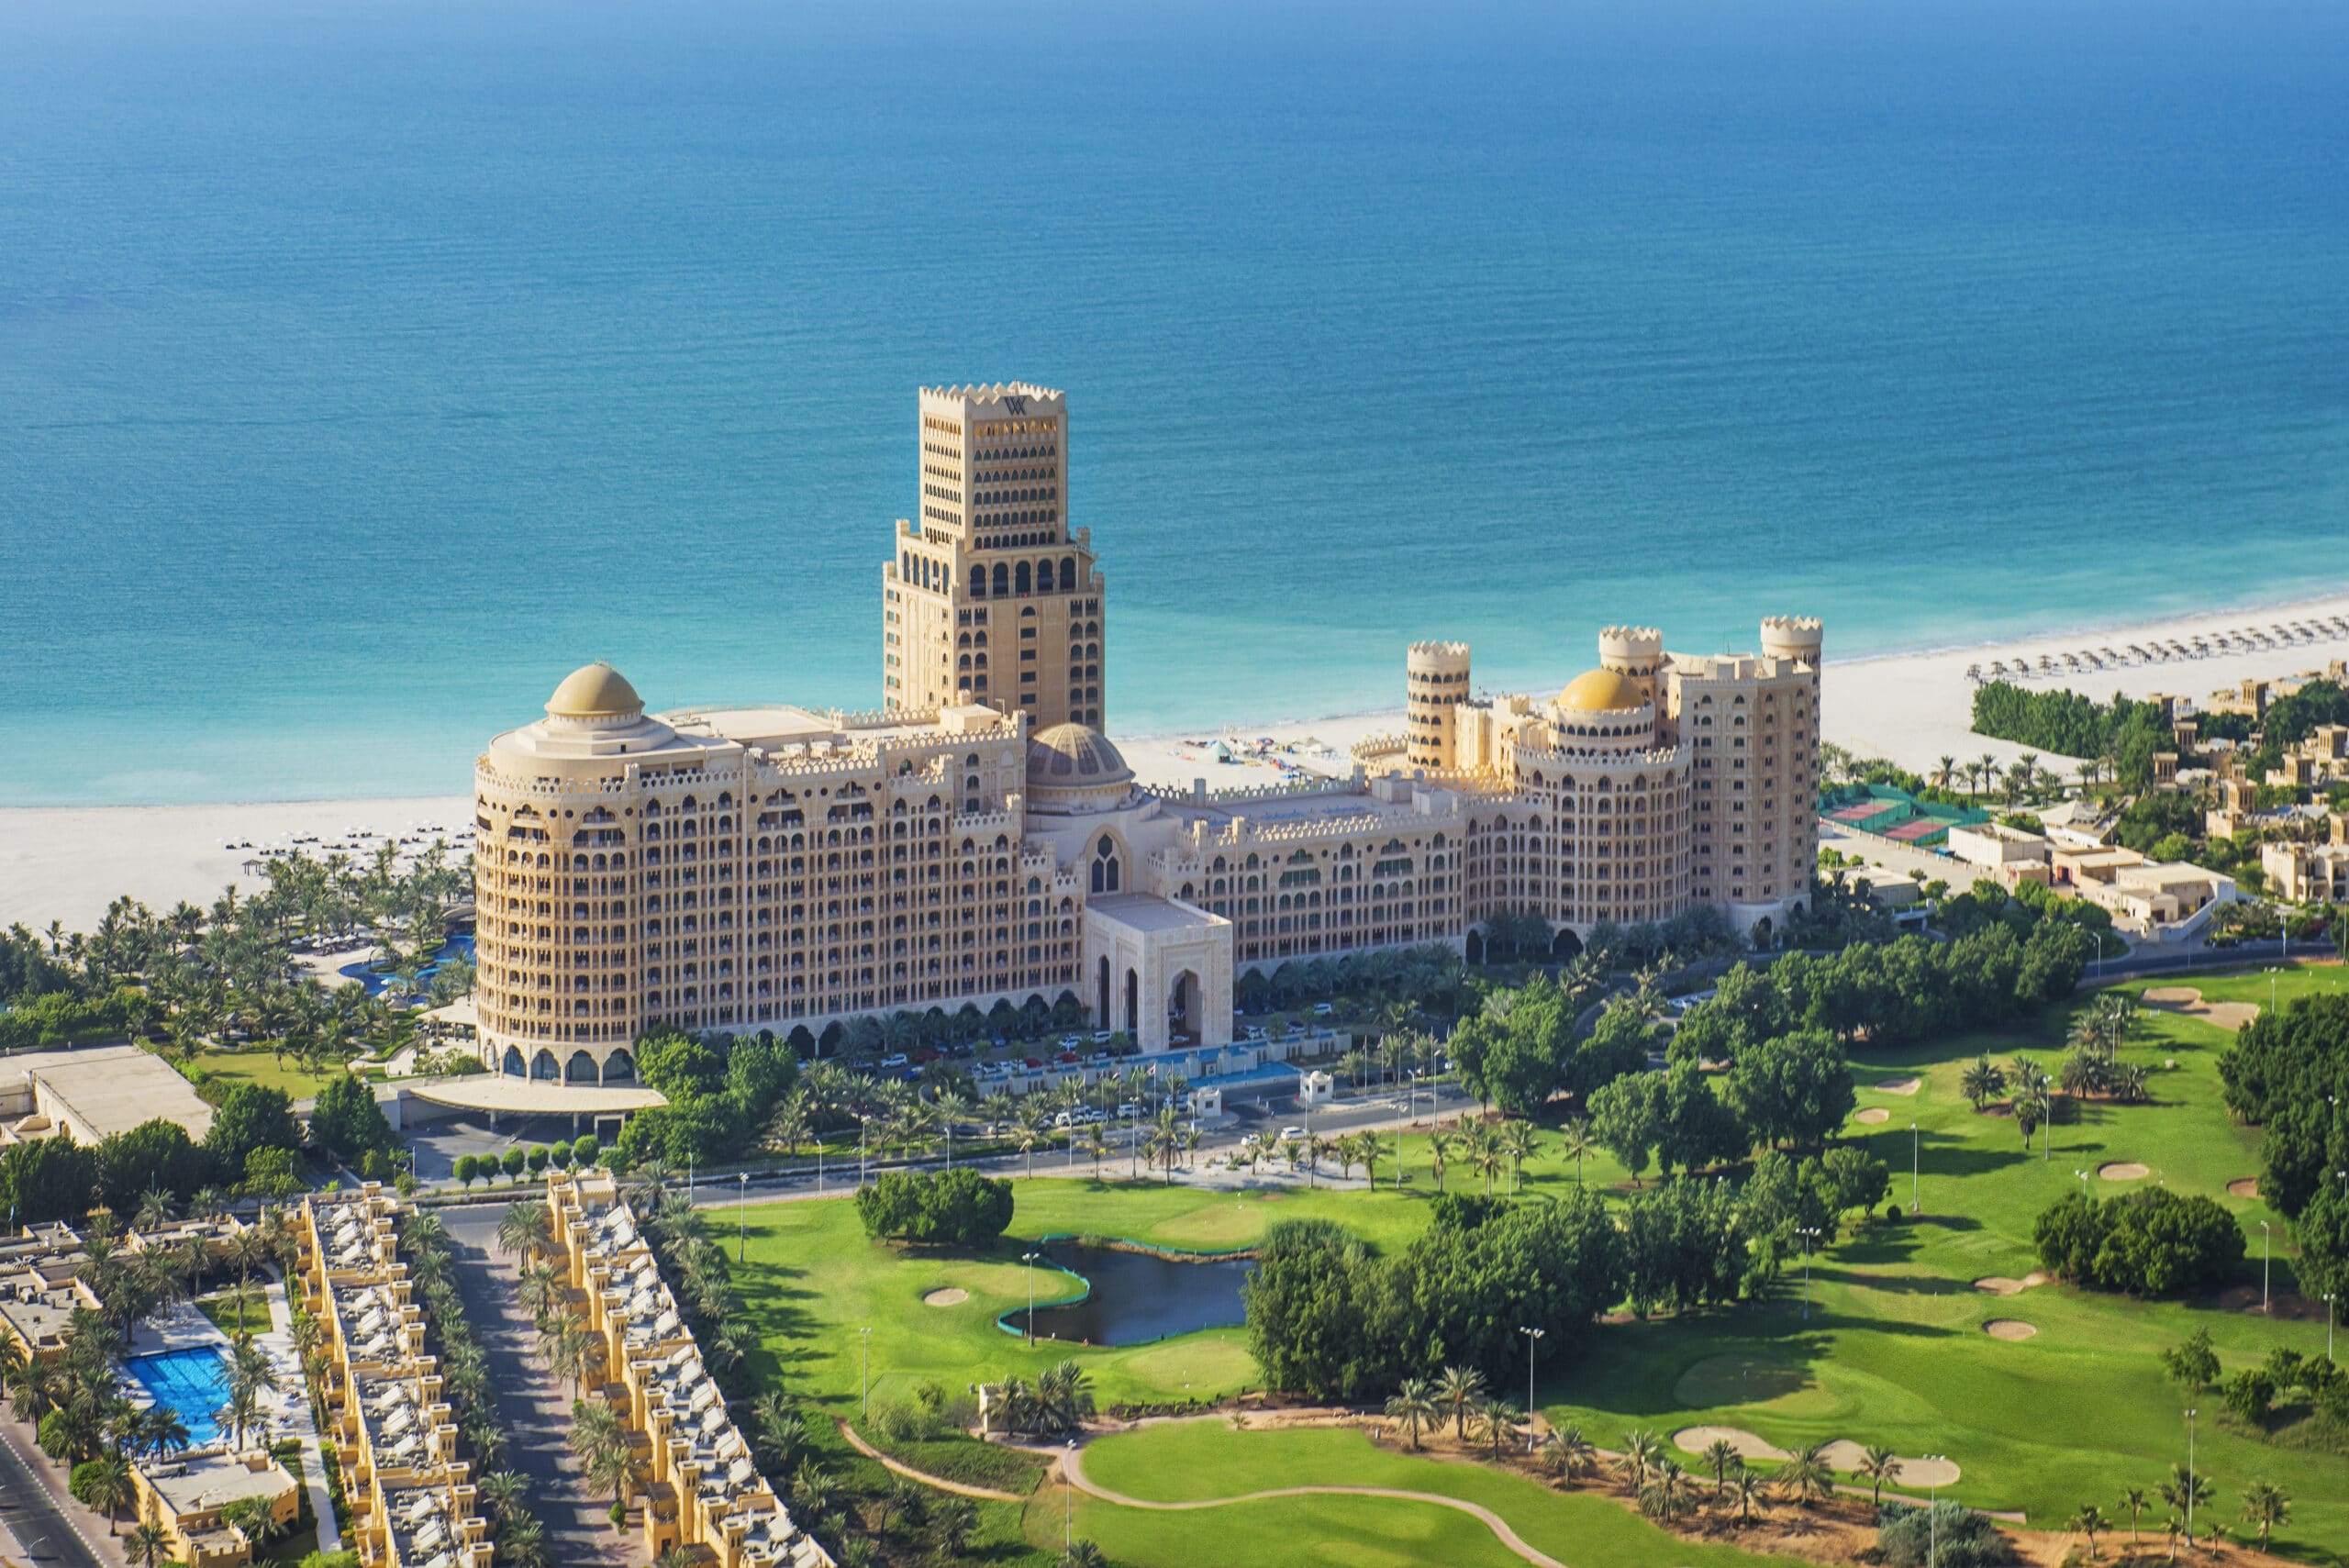 LIVE UNFORGETTABLE MOMENTS THIS SUMMER WITH A SUITE STAYCATION AT WALDORF ASTORIA RAS AL KHAIMAH